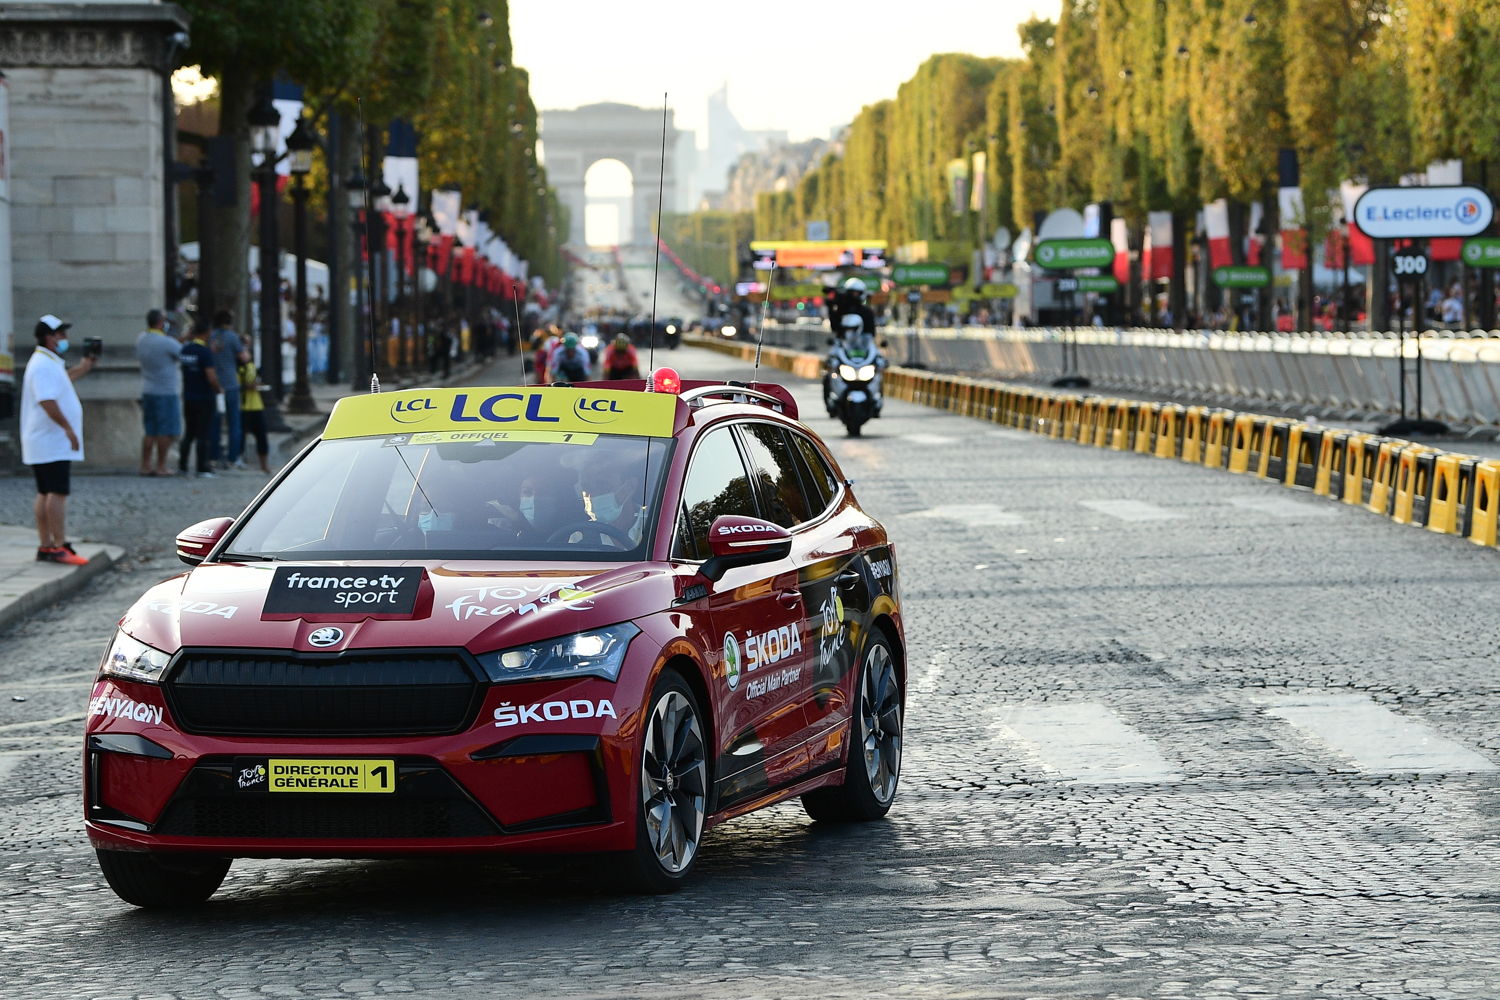 The fully electric ŠKODA ENYAQ iV again headed the
peloton as the leading vehicle (‘Red Car’) on yesterday’s
final stage from Mantes-la-Jolie to Paris. The new flagship
of ŠKODA’s model portfolio was fully retrofitted for this
specific purpose.
